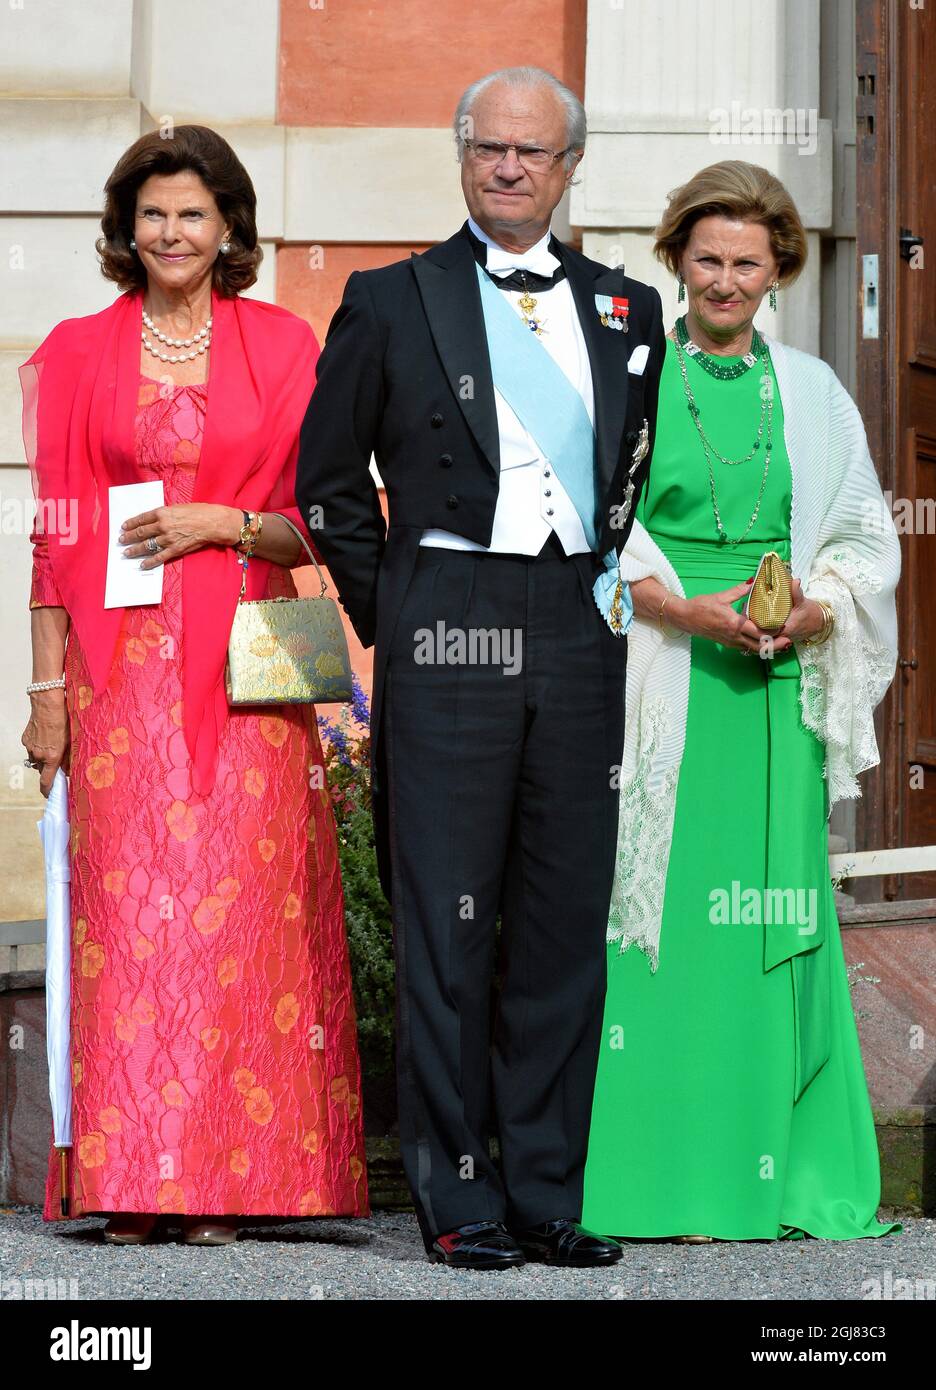 STOCKHOLM 2013-08-31 Queen Silvia, King Carl Gustaf and Queen Sonja arrive for the wedding at the Ulriksdal Palace Chapel in Stockholm, Sweden, August 31, 2013. The Swedish Kings godson Gustaf Magnuson (son of Princess Christina and Tord Magnuson) married model Vicky AndrÃ©n Saturday. Photo Jonas Ekstromer / SCANPIX / ** SWEDEN OUT ** Stock Photo